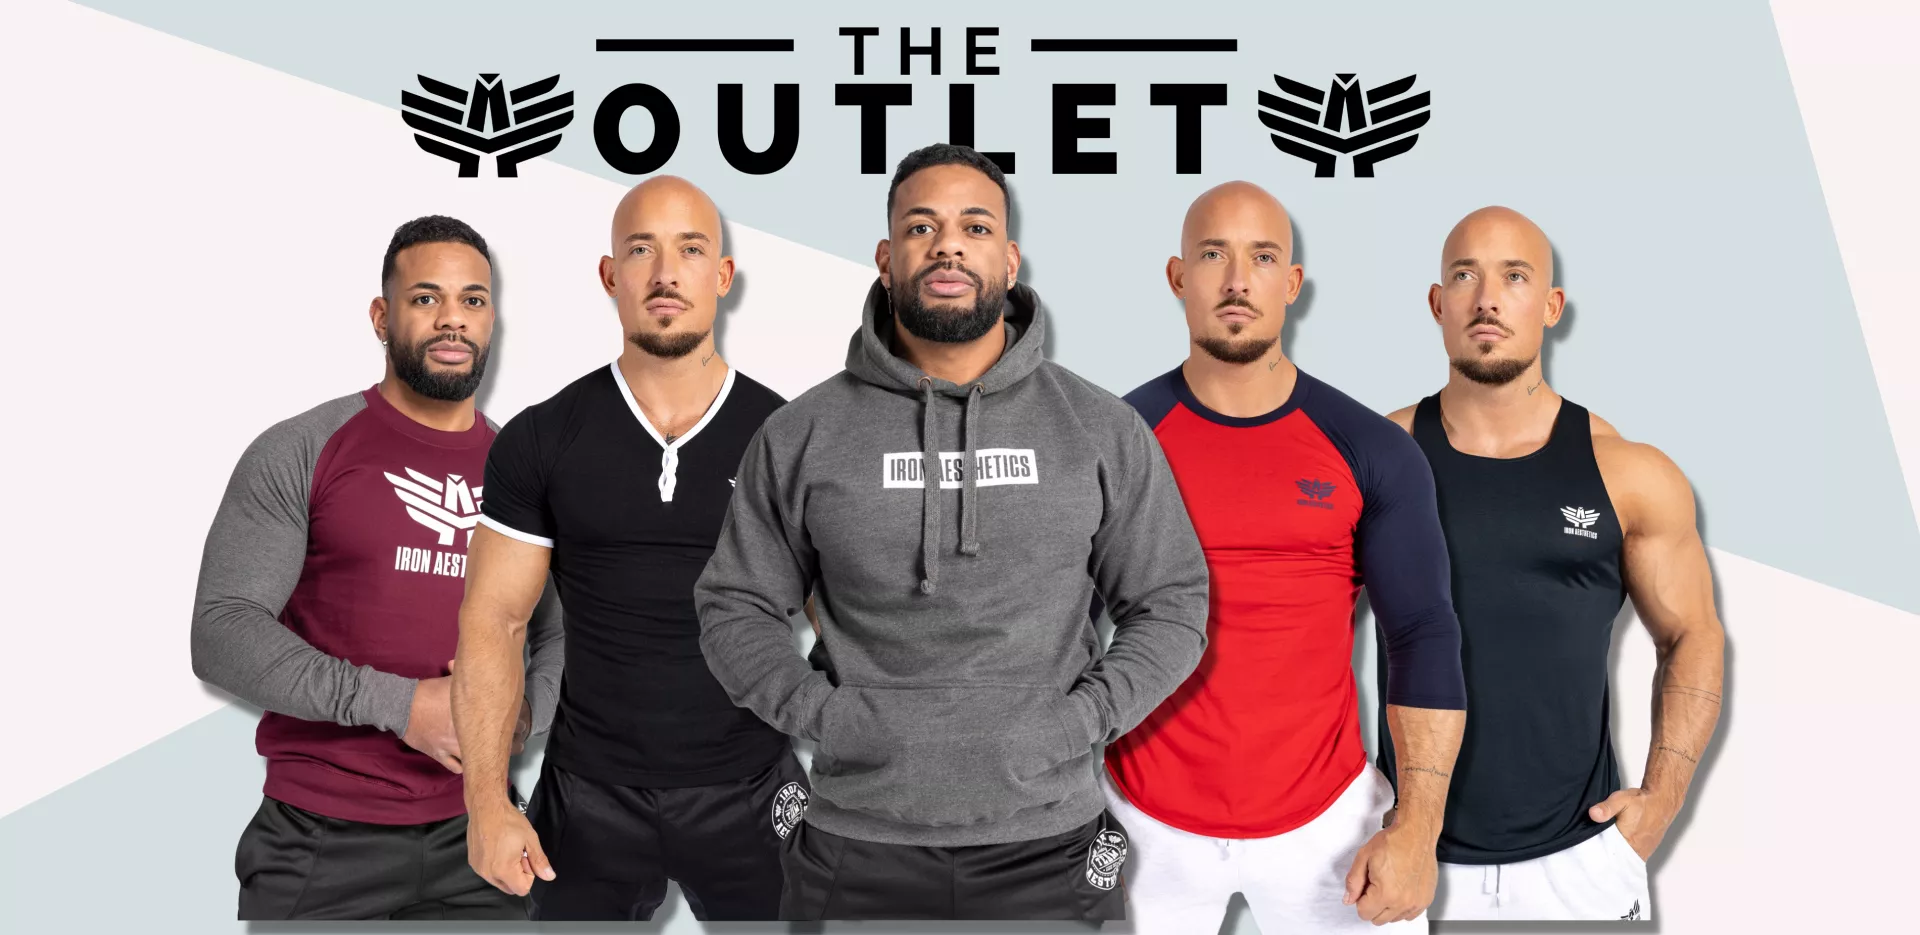 OUTLET BANNER FEBRUARY 2023